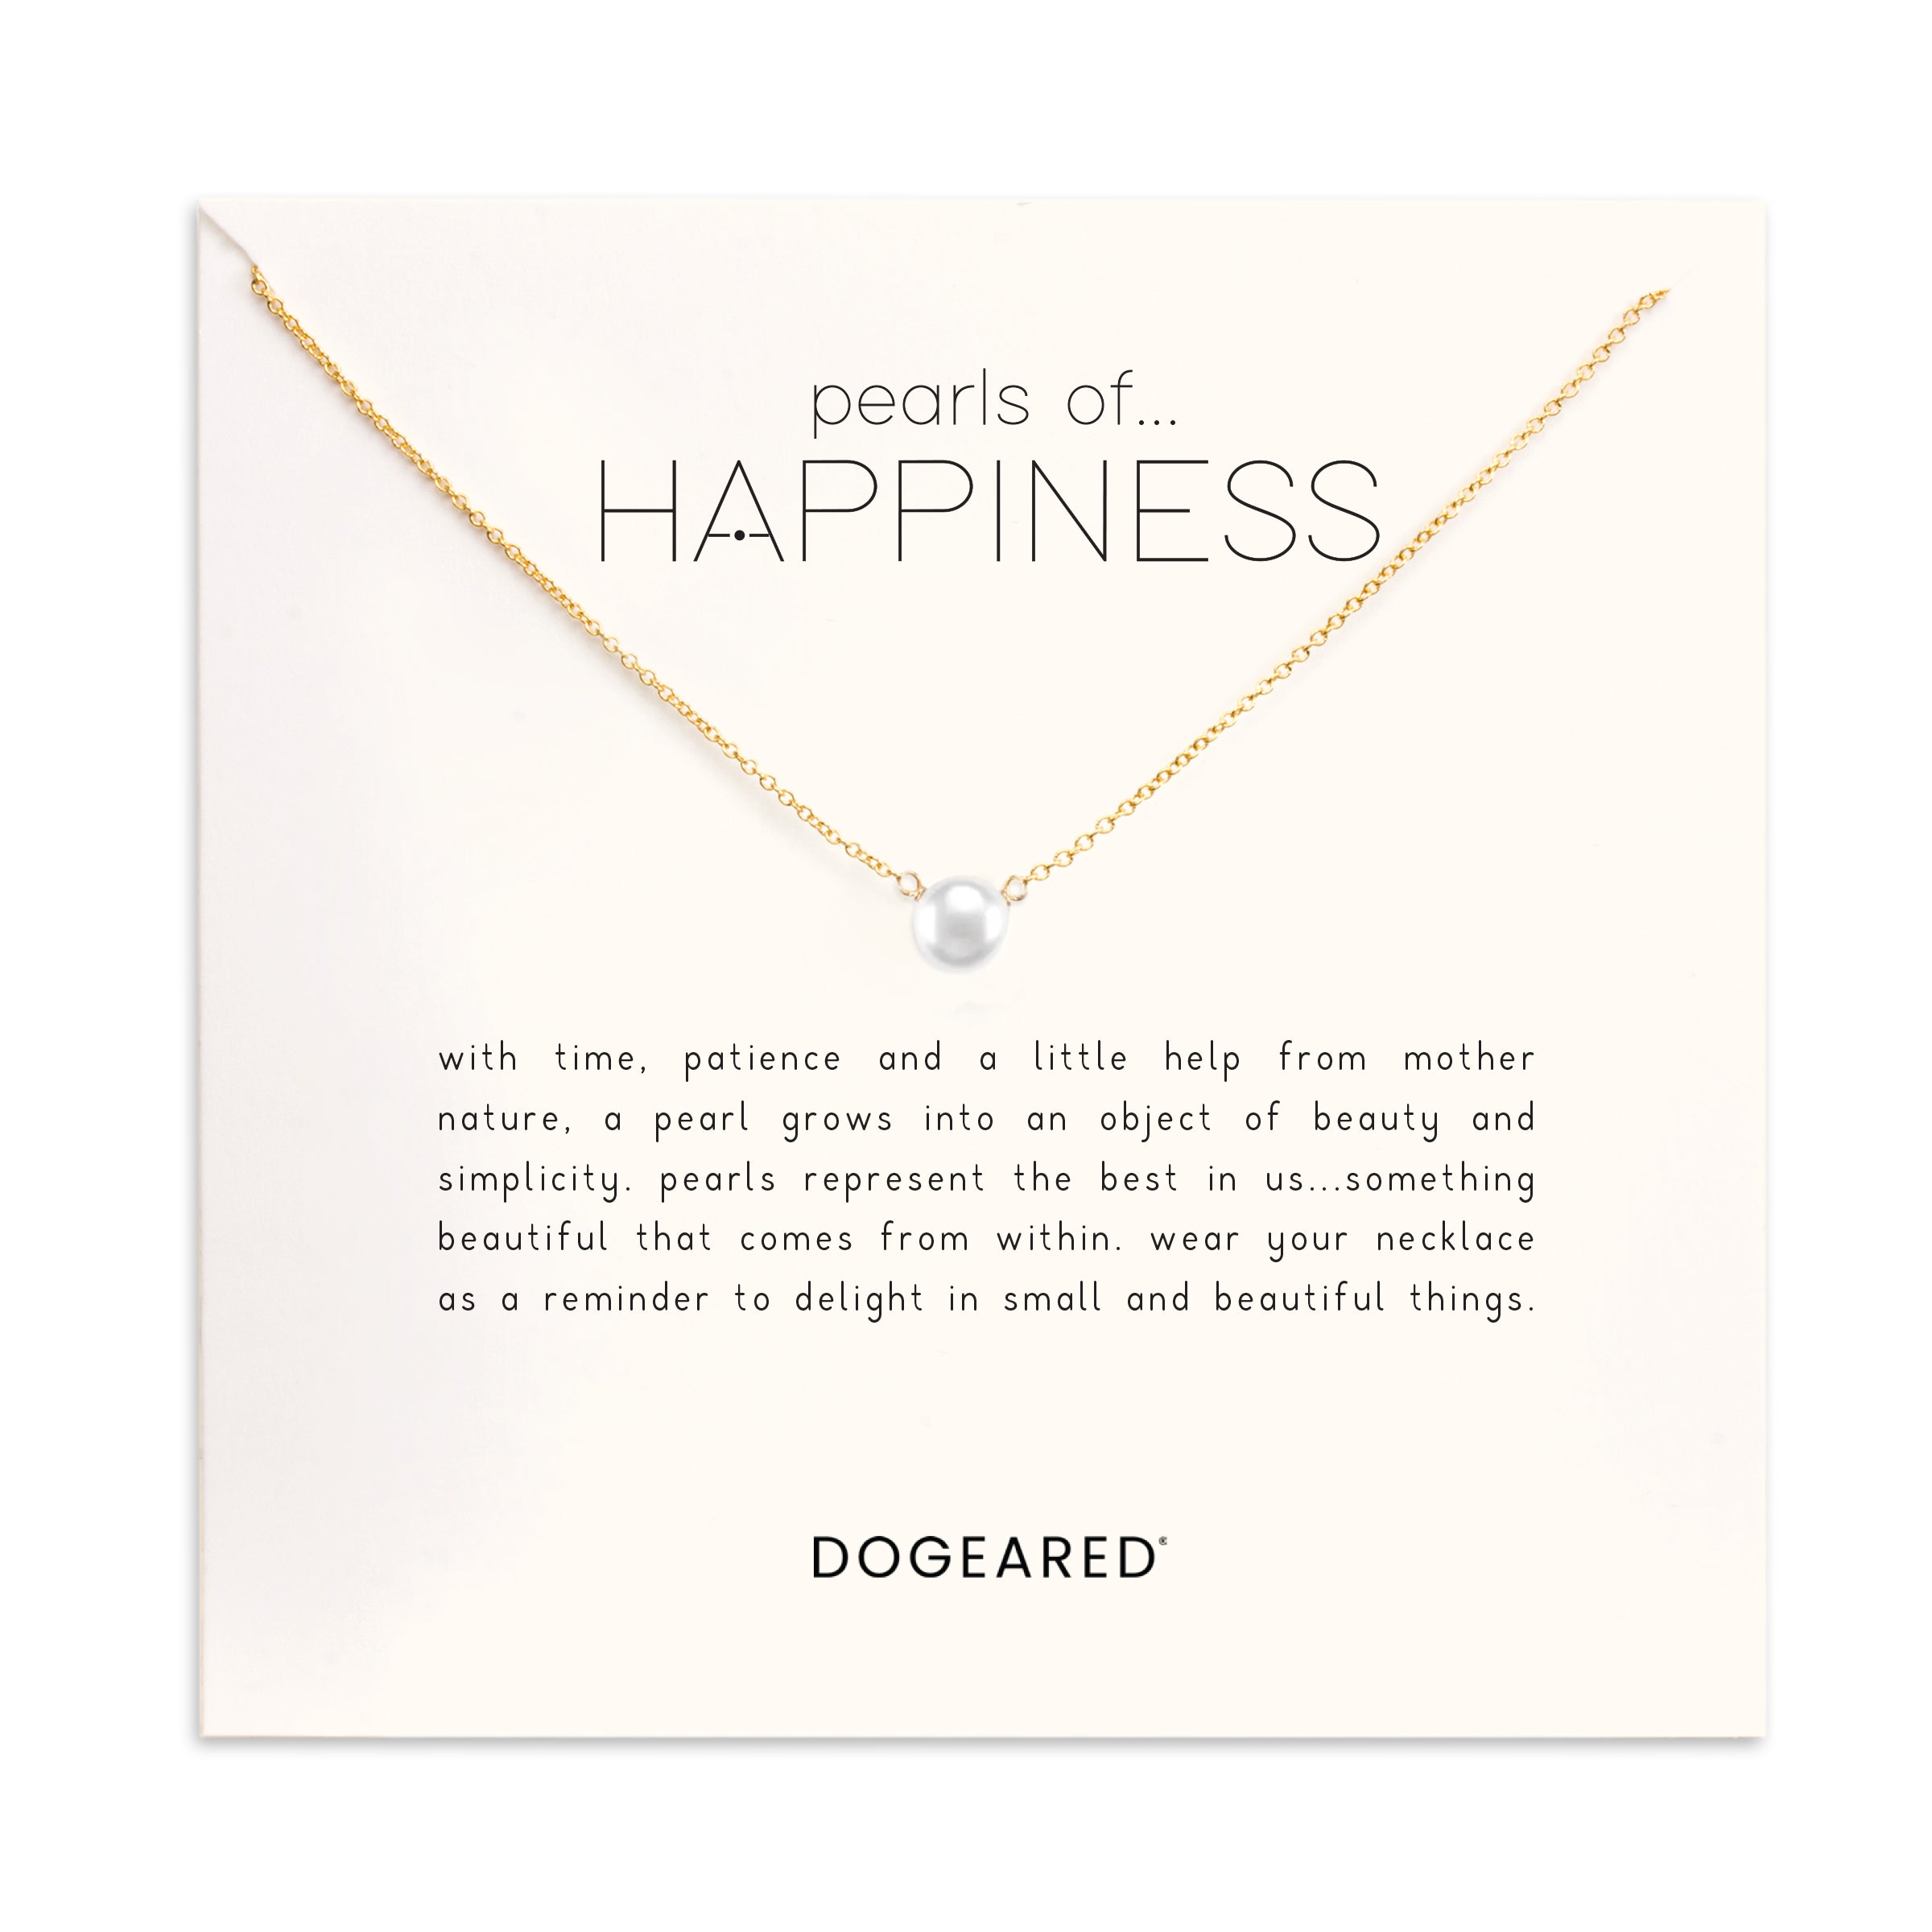 Pearls of happiness small white pearl necklace